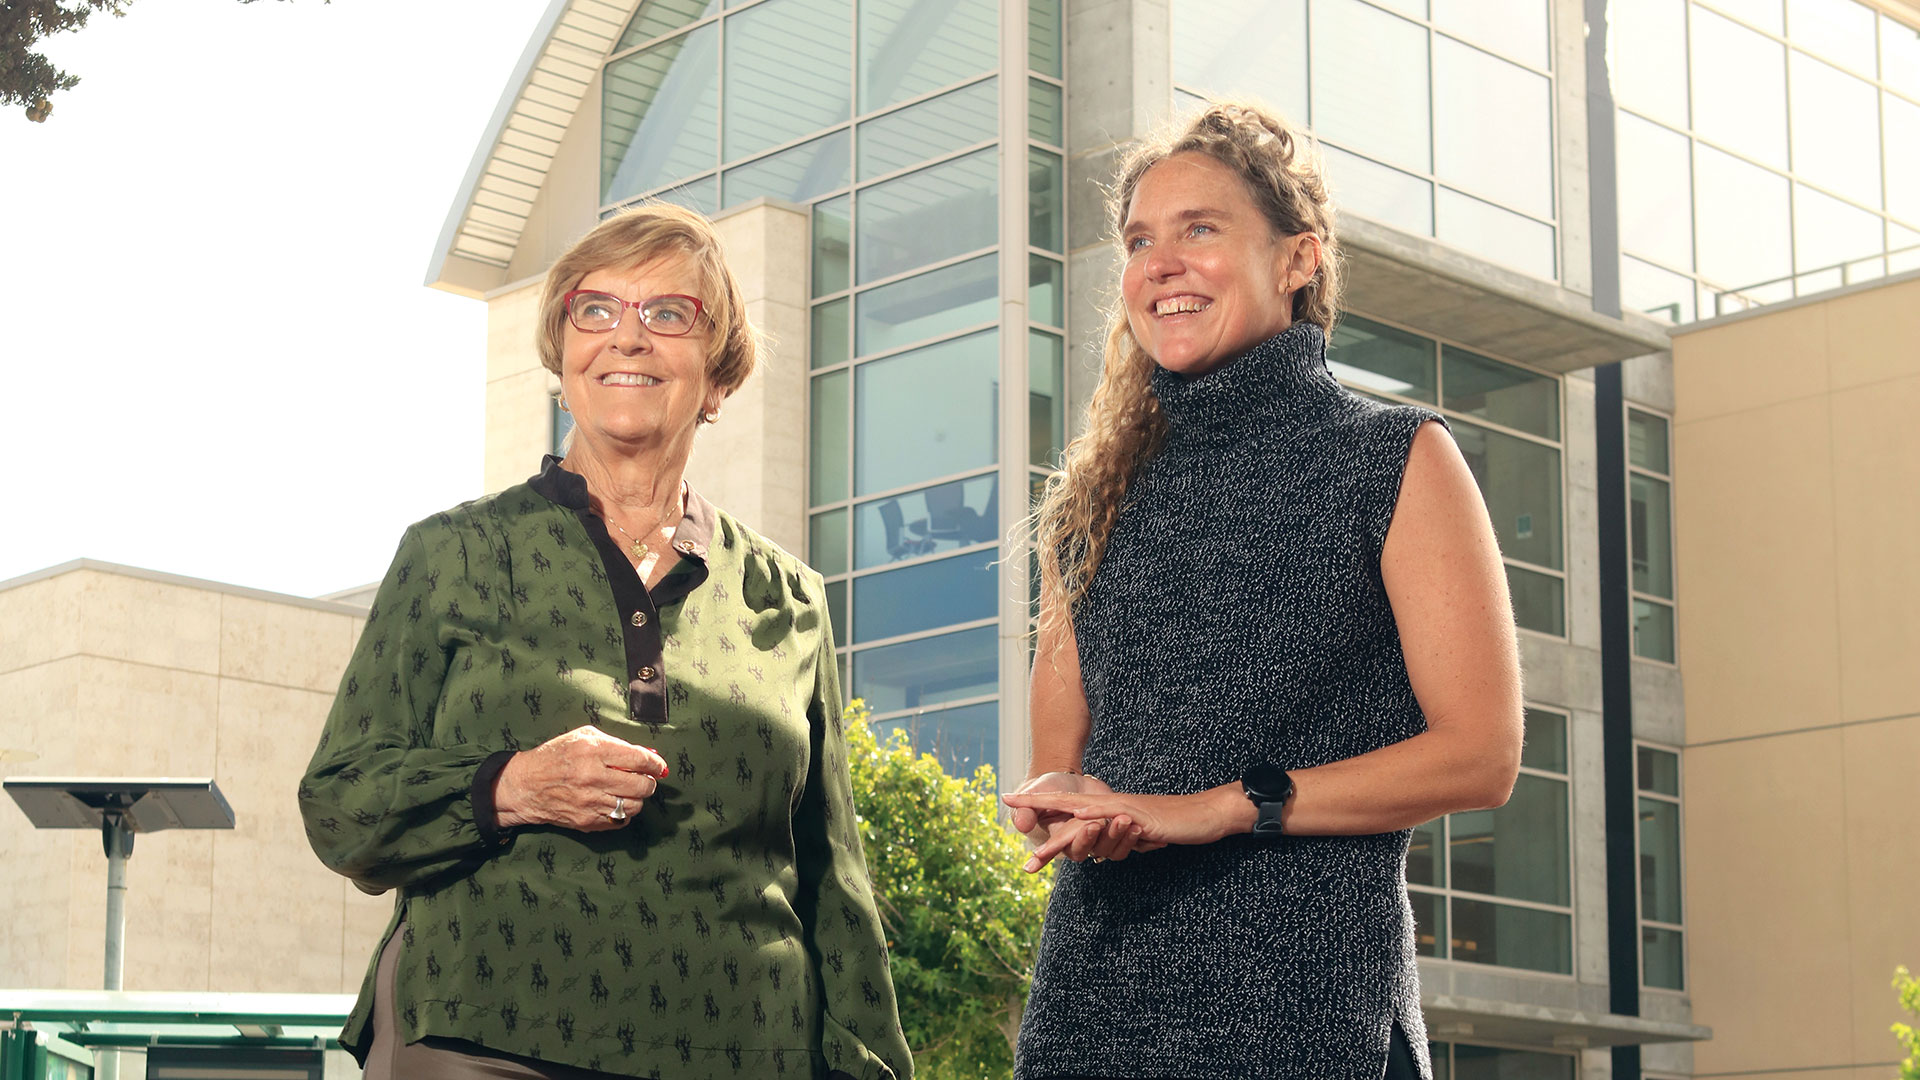 From left: Konny Murray and Jacqueline Grallo, interim library dean, outside the Tanimura & Antle Family Memorial Library at CSUMB. Photo by Randy Tunnell